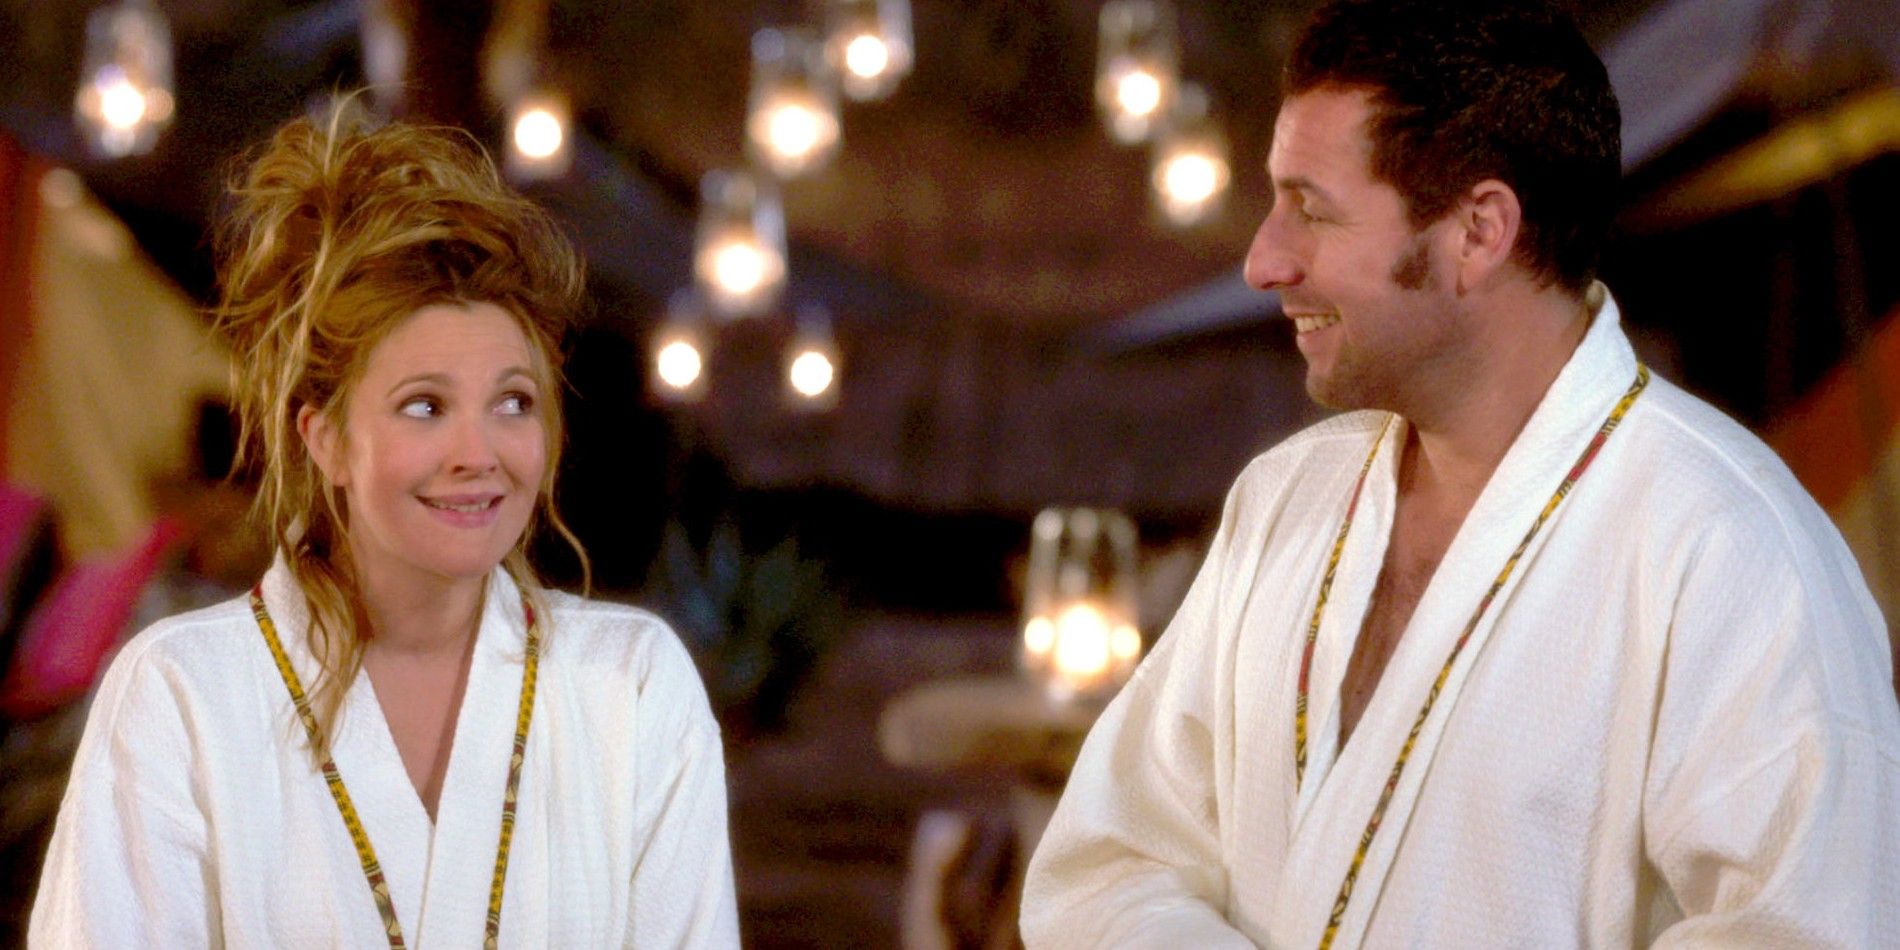 Drew Barrymore and Adam Sandler in robes in Blended